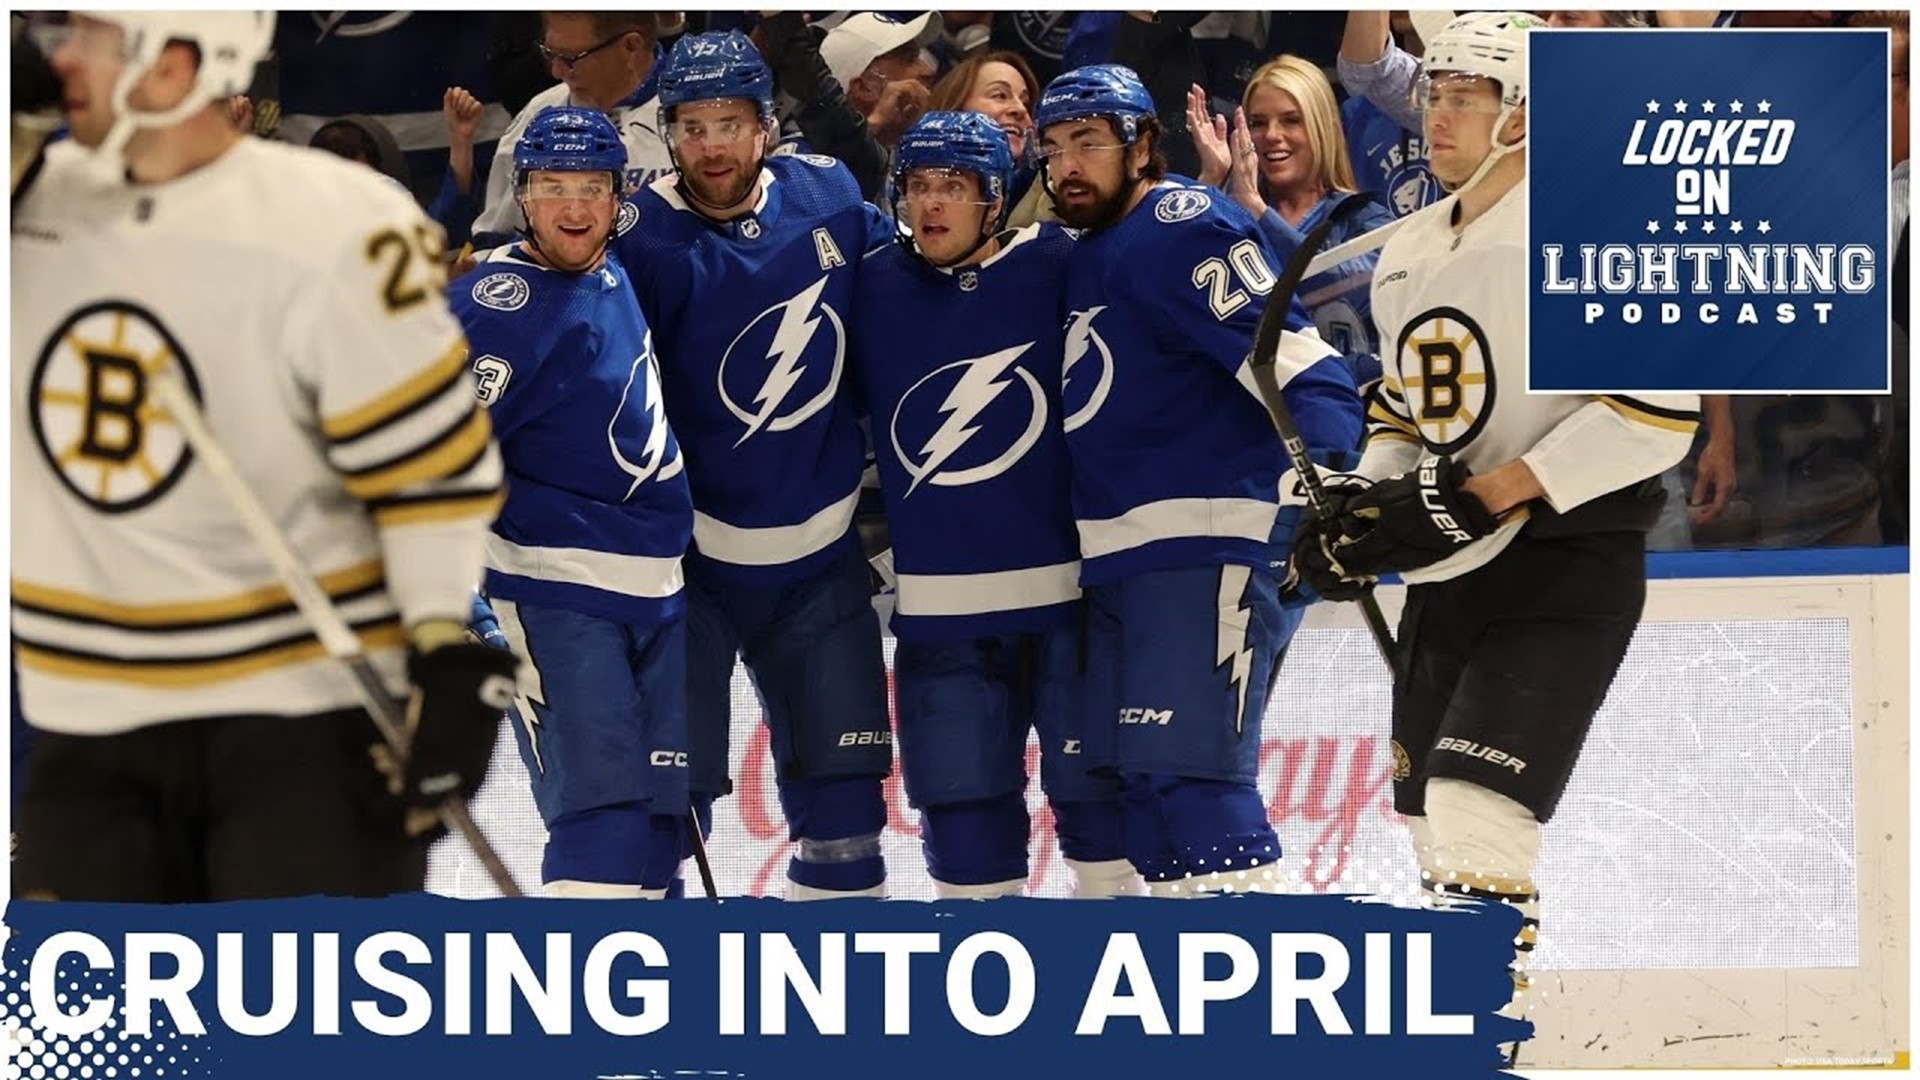 The Tampa Bay Lightning looked like they were in playoff form by knocking off the Bruins at home, 3-1.